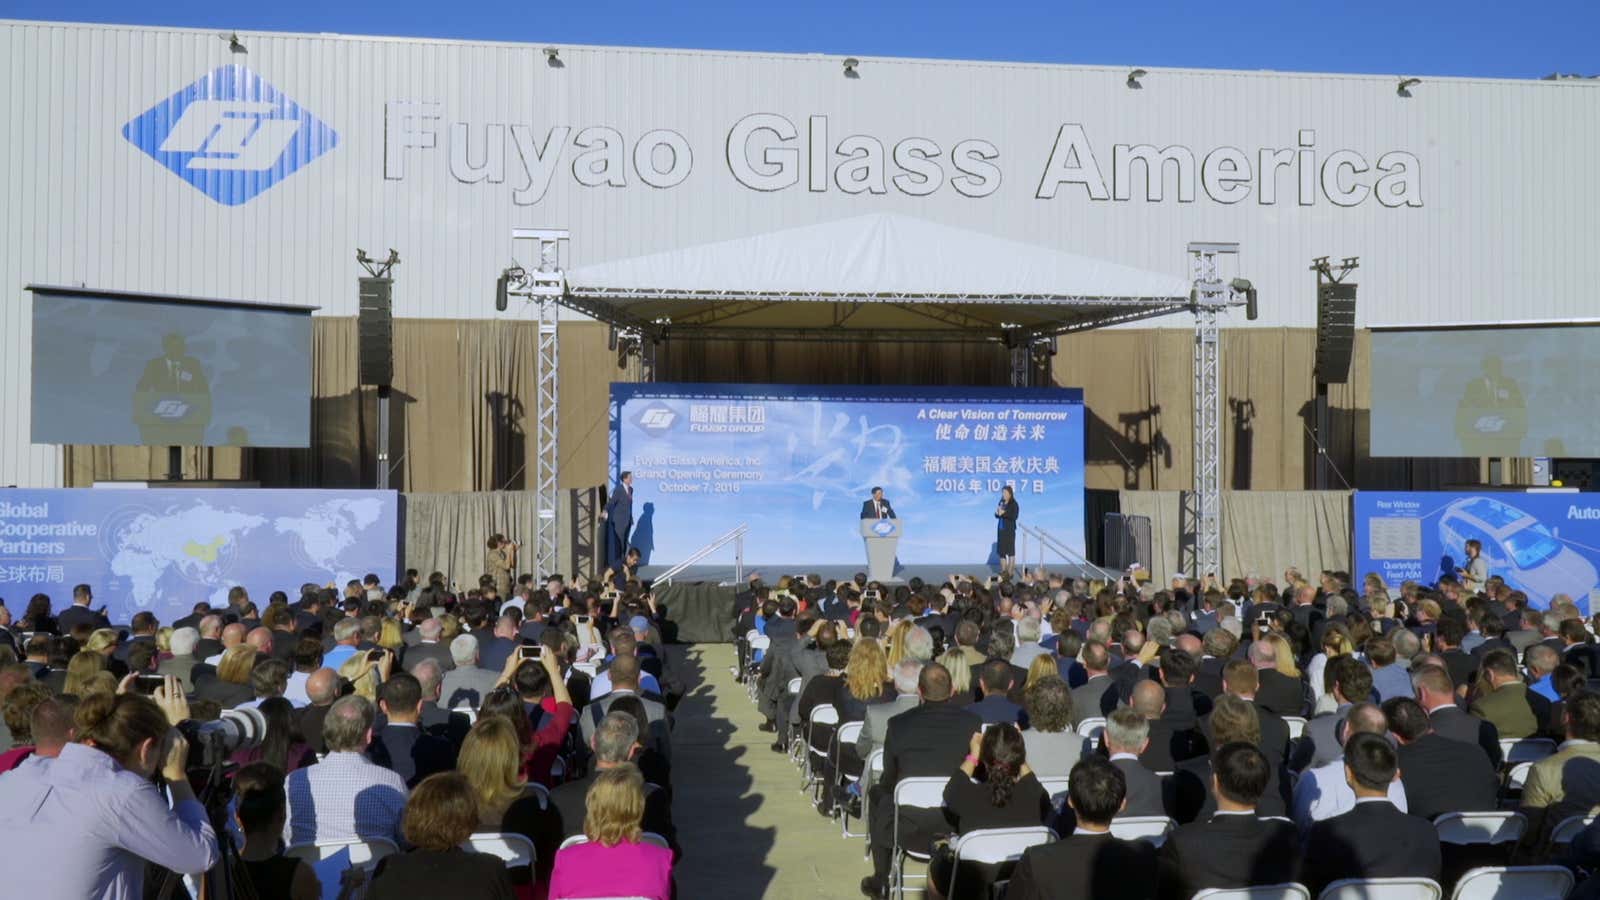 A Chinese-owned Fuyao Glass plant in Ohio is the subject of the documentary “American Factory.”